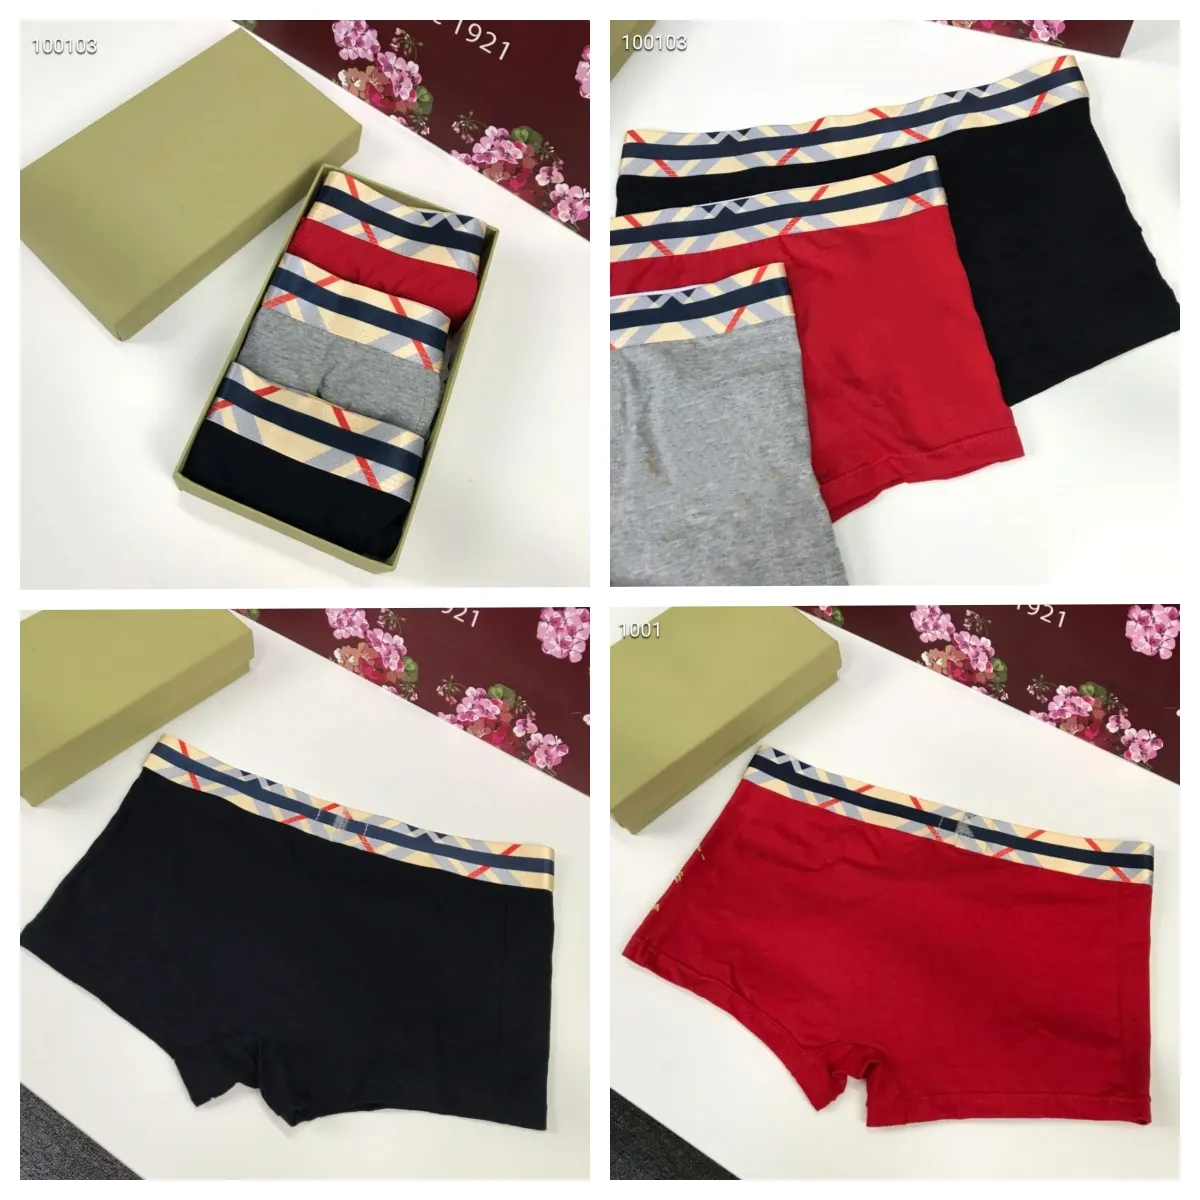 Fashionable luxury High Quality underwear Thin Loose Breathable Designer Cotton Underpants Boxers Short Casual Breathable Male Underwear Briefs Shorts Size M-2XL